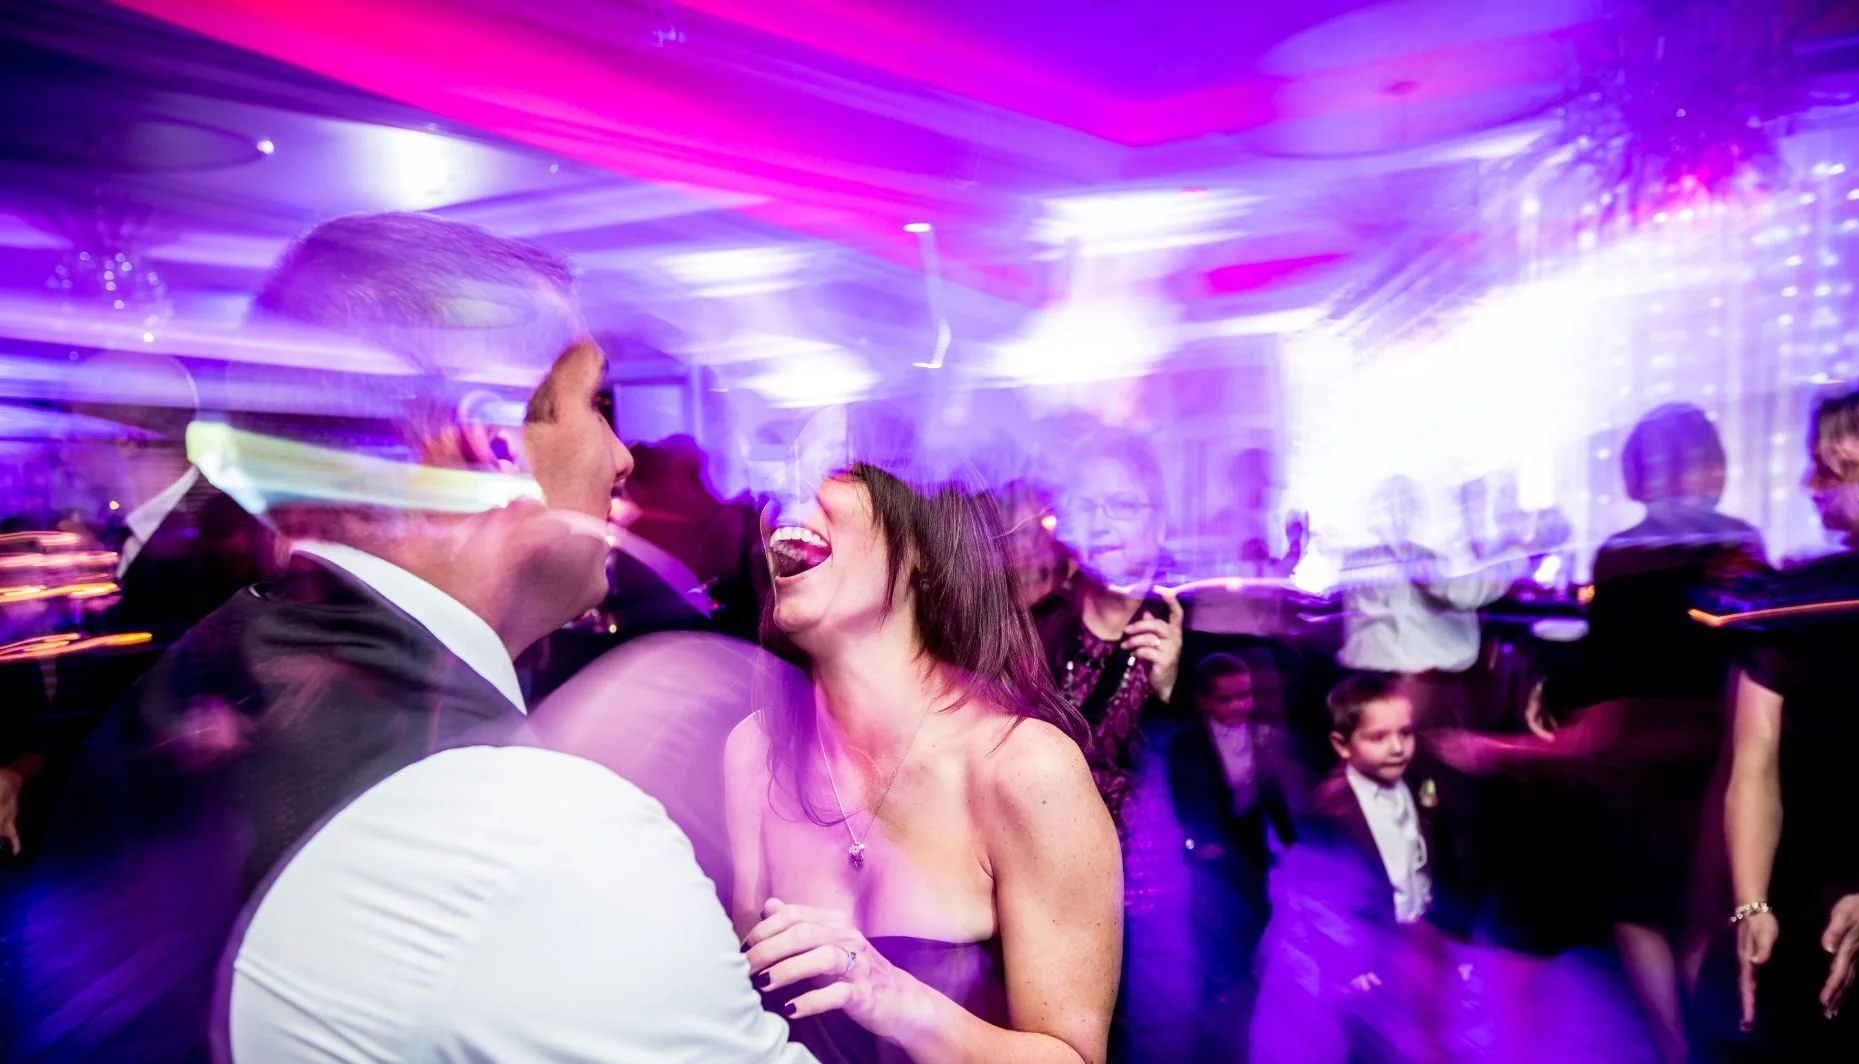 With our lighting packages, we can transform and electrify your reception and dance floor